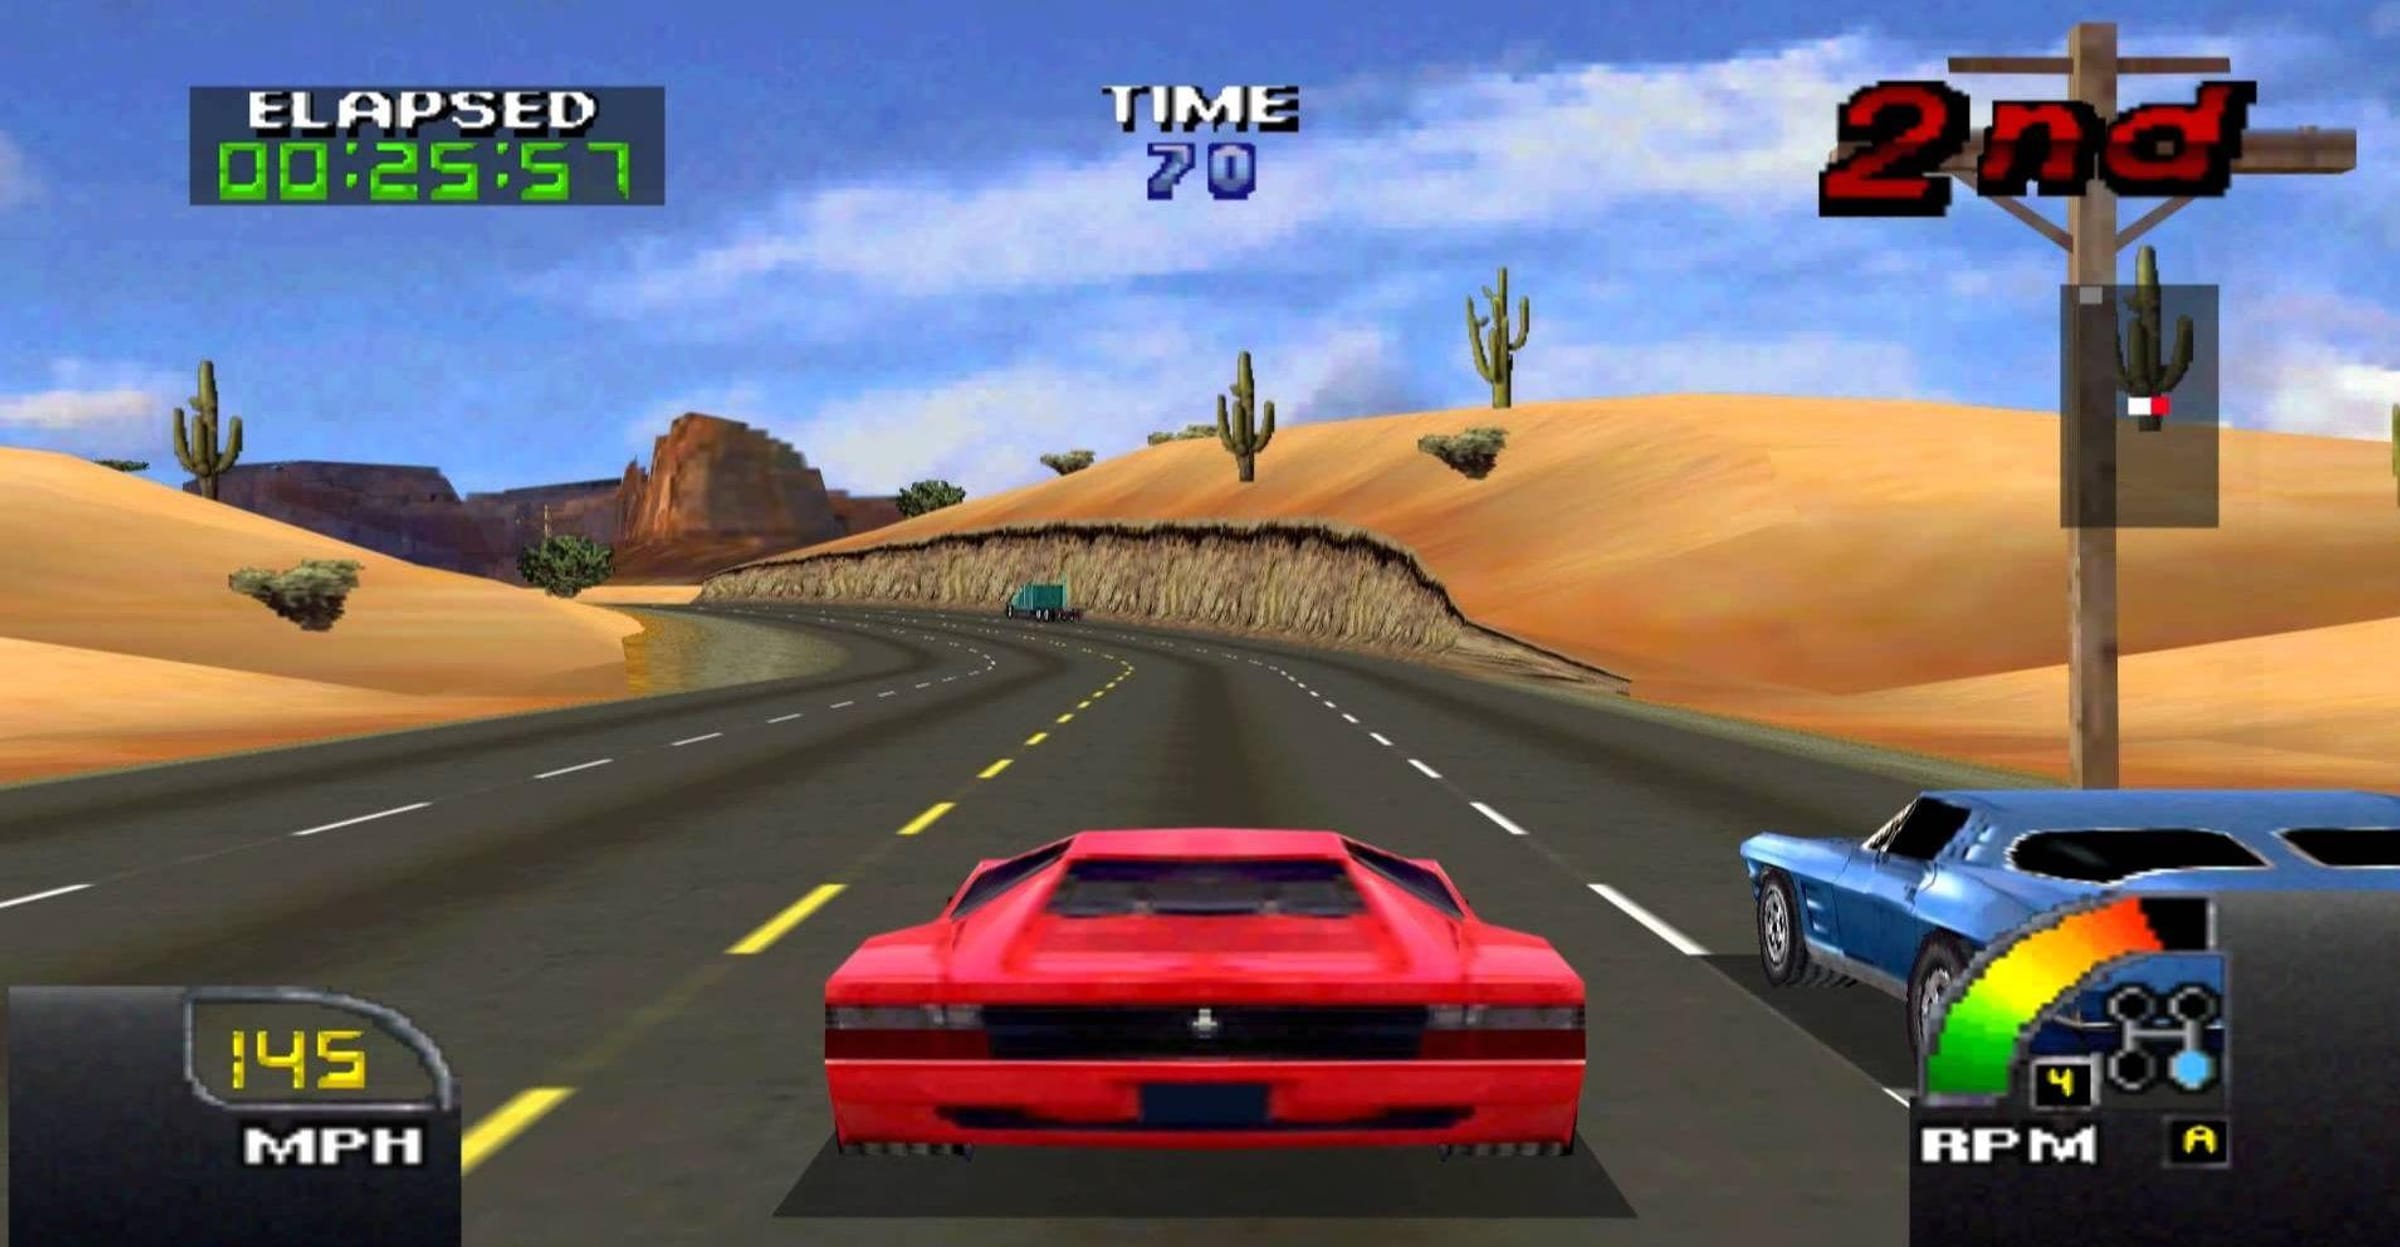 The Best Car and Racing Video Games from the 1980s